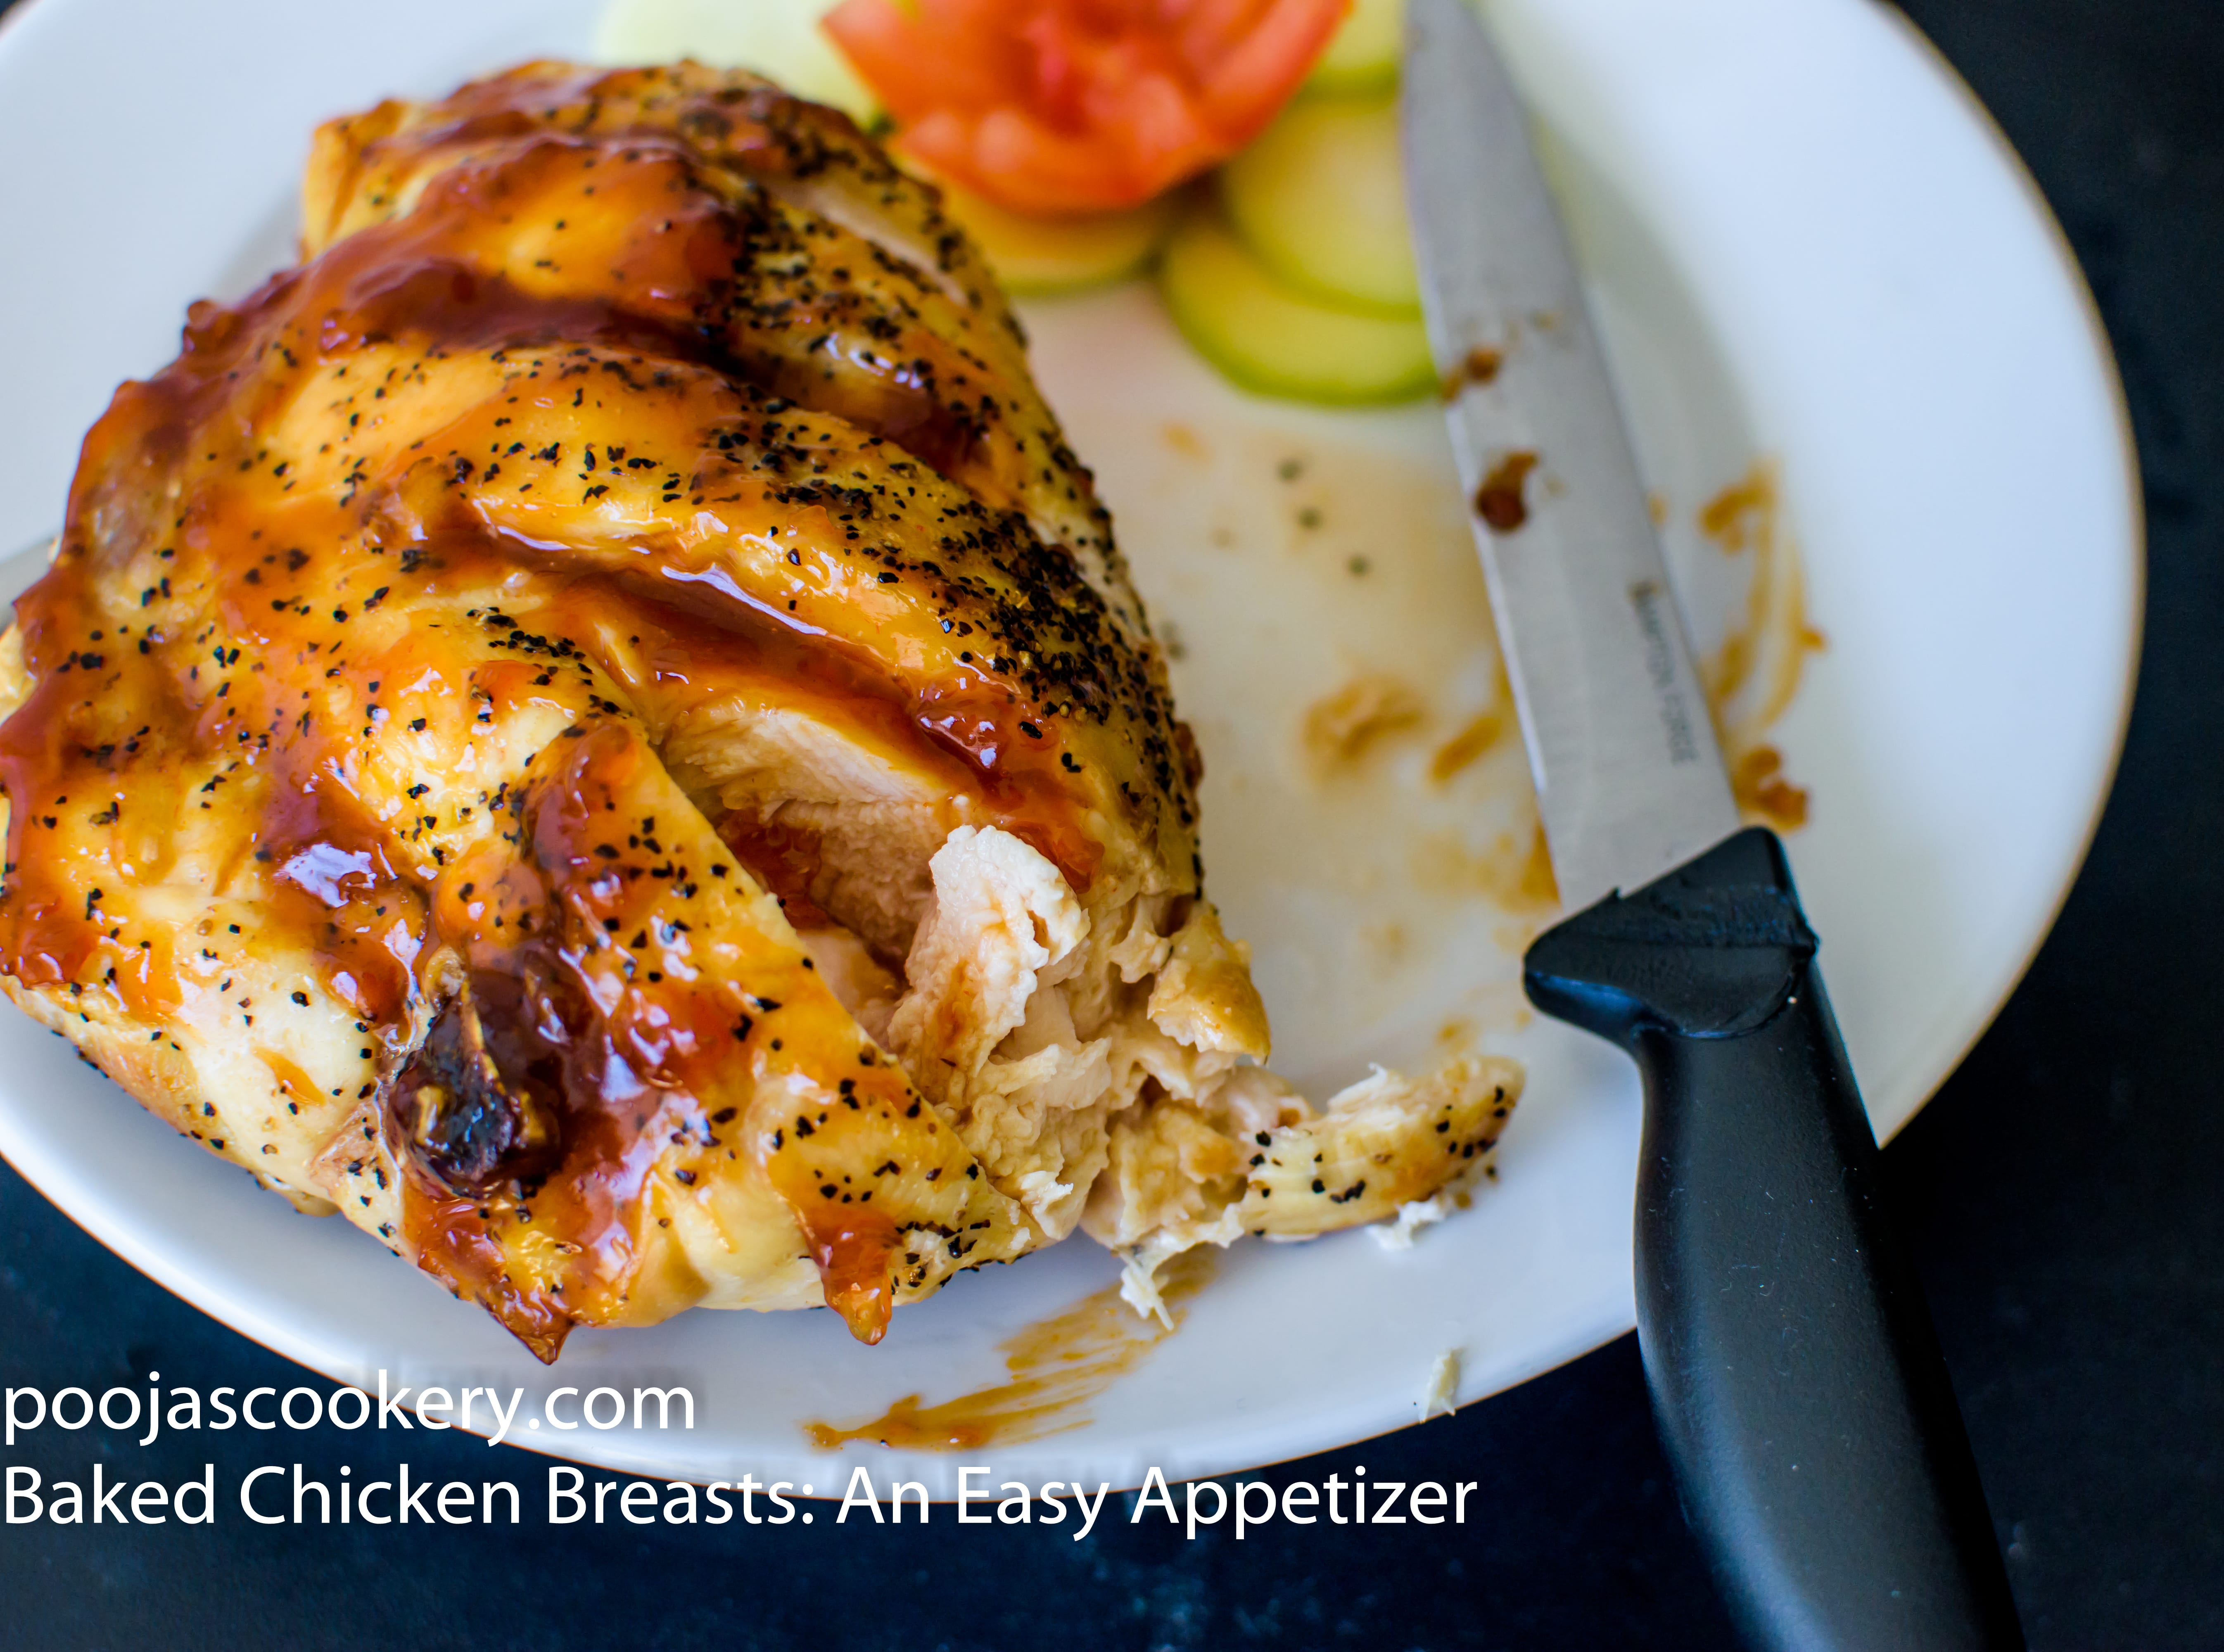 Baked Chicken Breasts: An Easy Appetizer |poojascookery.com